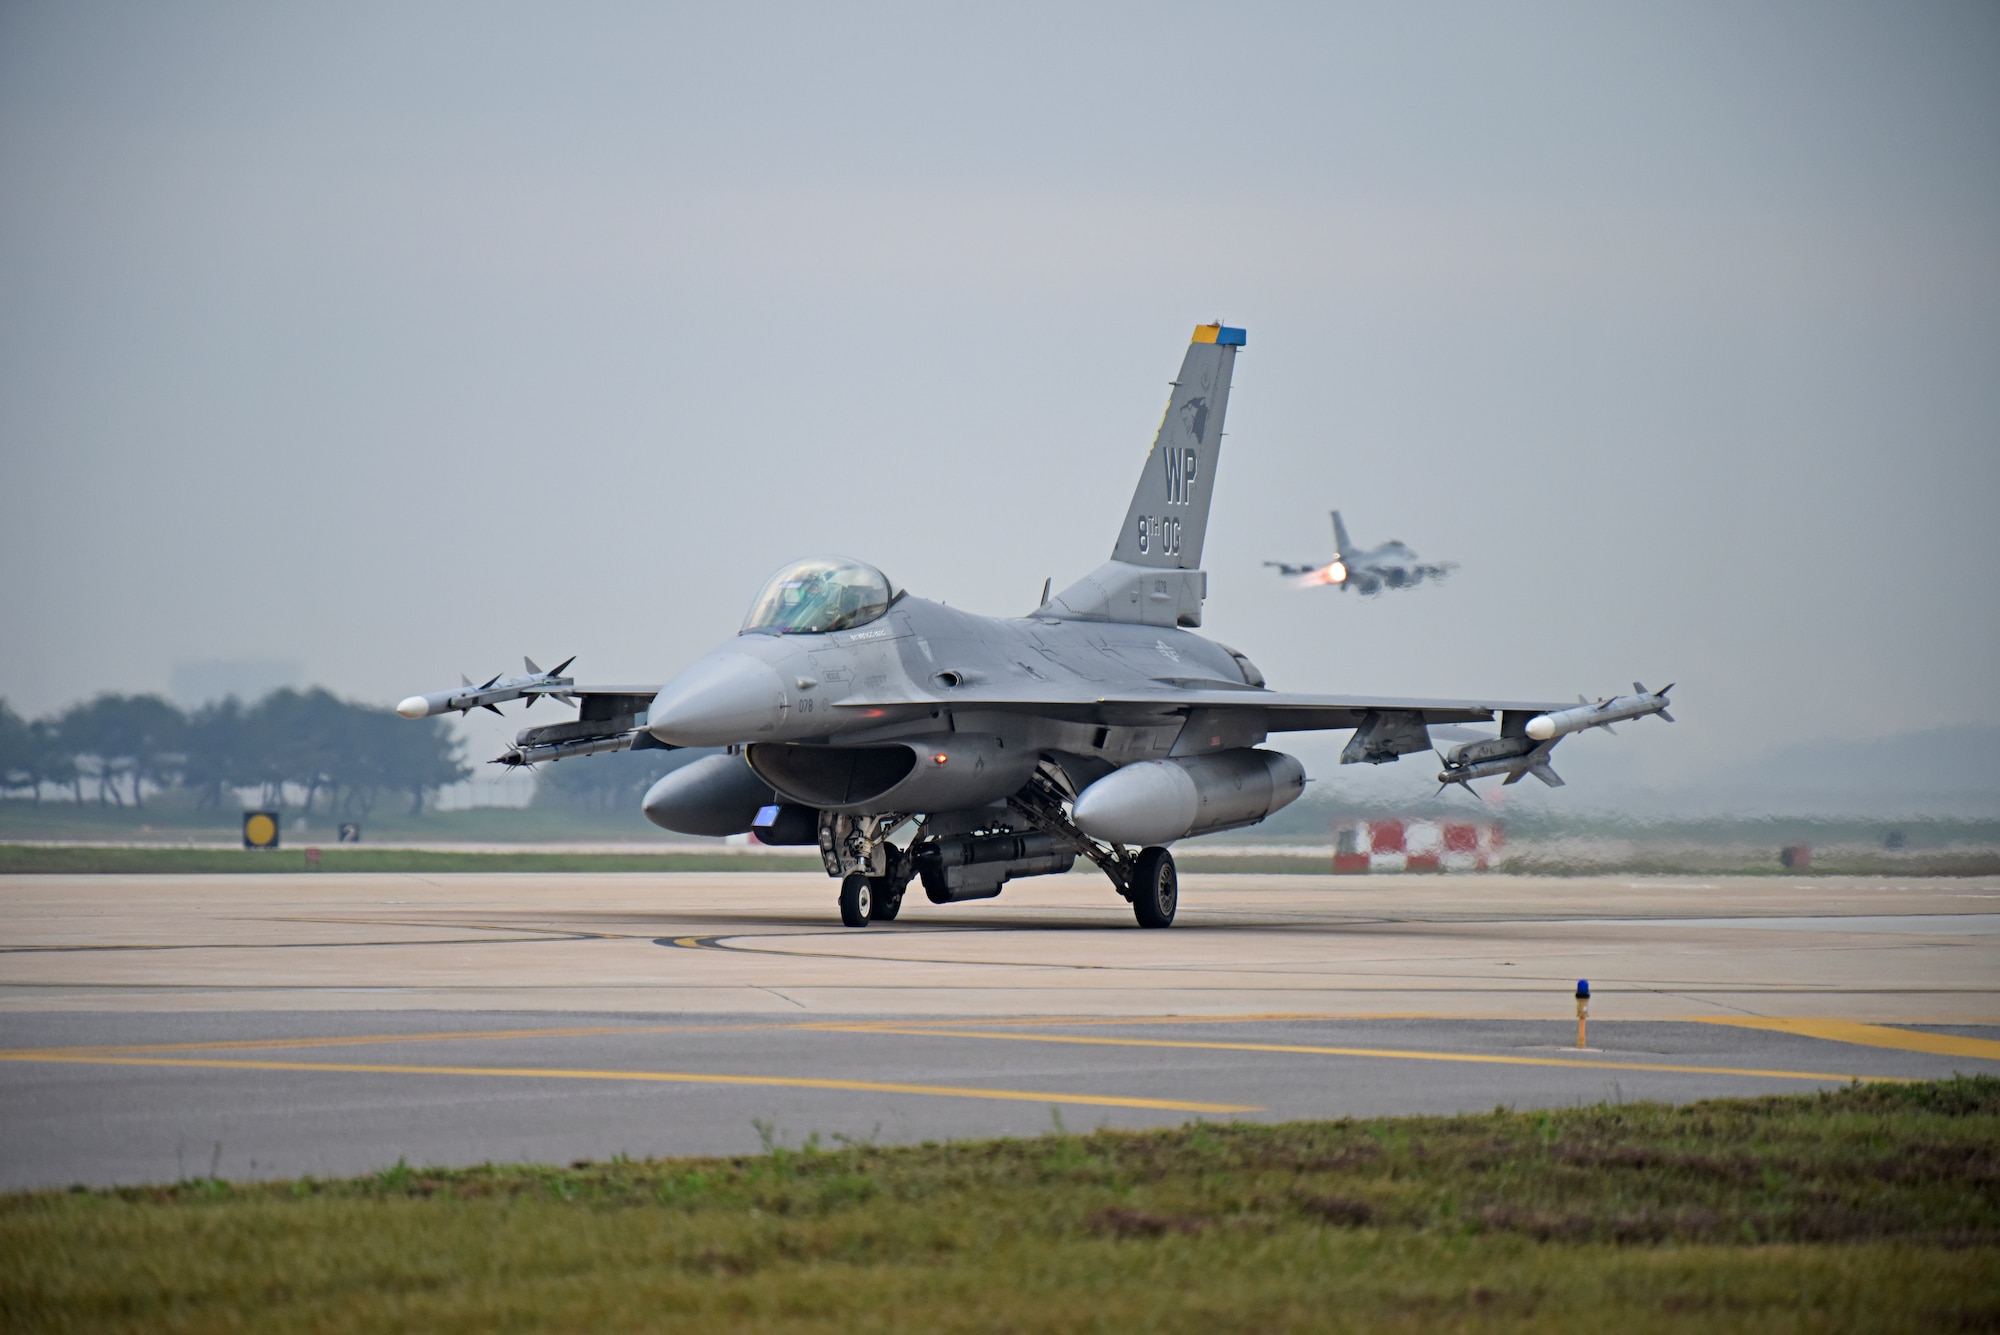 A U.S. Air Force F-16 Fighting Falcon assigned to the 8th Operations Group prepares to take-off for a routine training flight at Kunsan Air Base, Republic of Korea, Oct. 10, 2019. The 8th OG has two F-16 squadrons including the 35th Fighter Squadron “Pantons” and the 80th FS “Juvats.” (U.S. Air Force photo by Staff Sgt. Mackenzie Mendez)